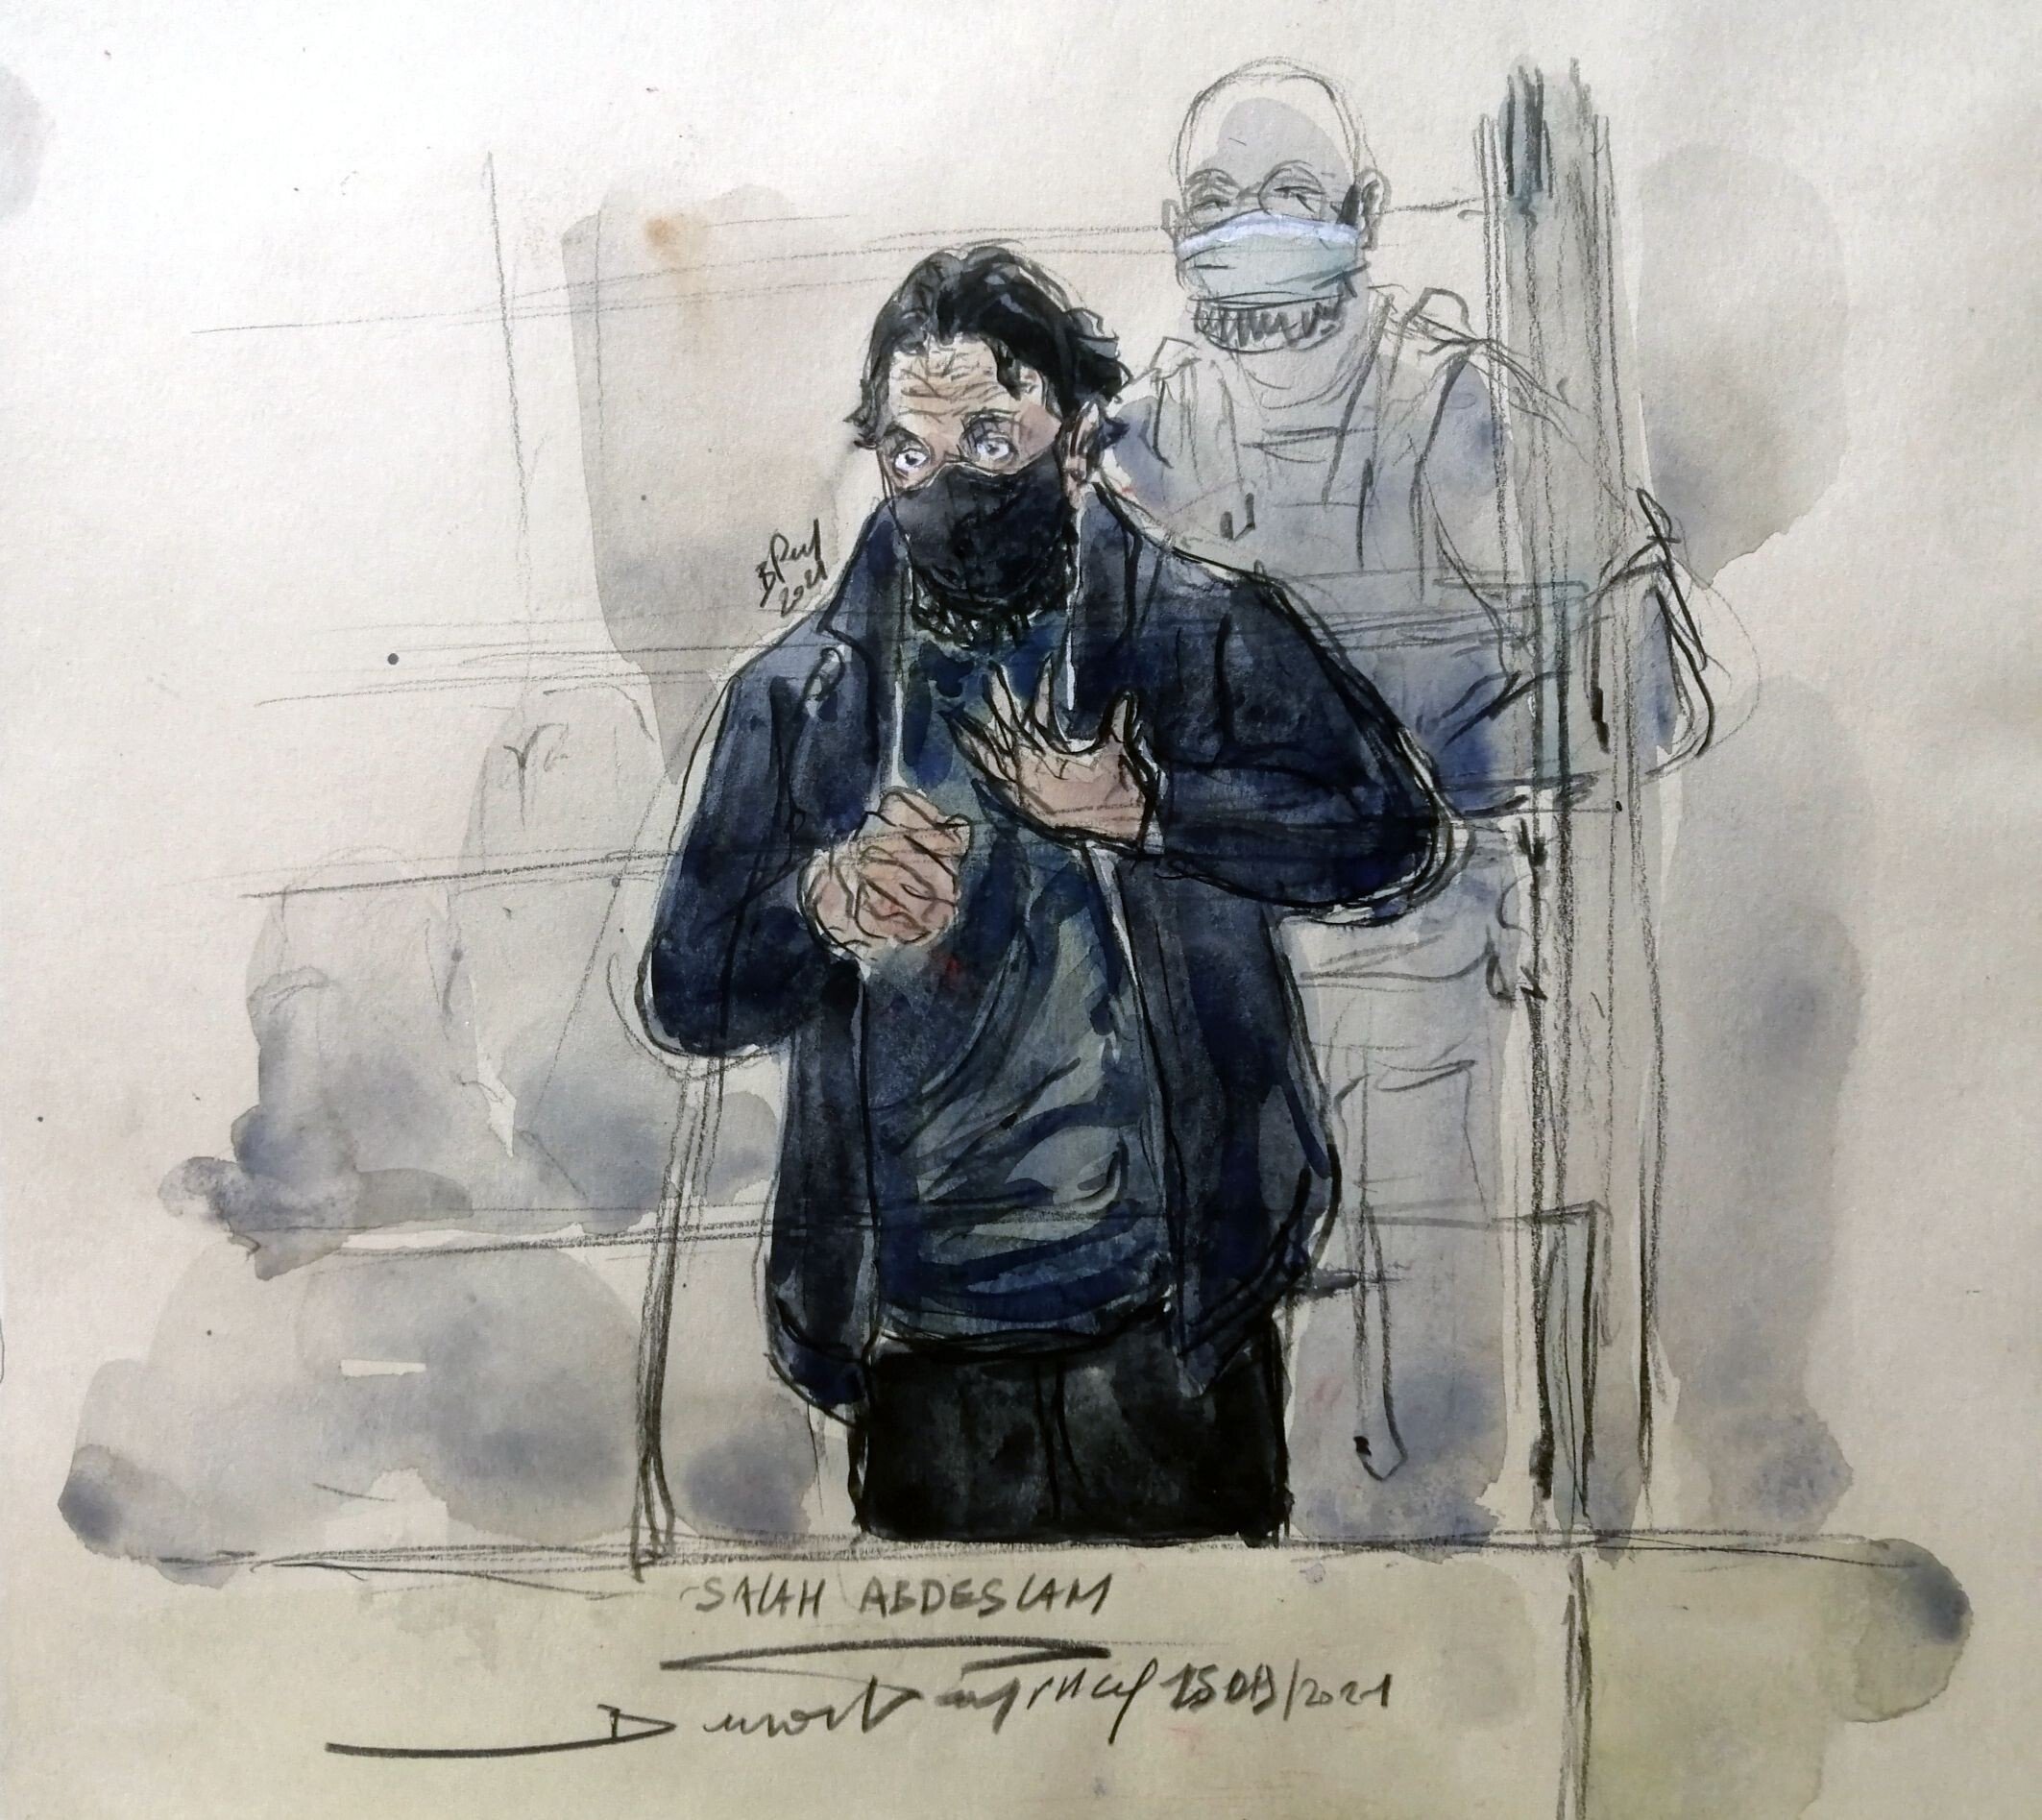 Salah Abdeslam, the prime suspect in the 2015 Paris attacks, is seen in a temporary courtroom set up at the Palais de Justice of Paris on Wednesday. Courtroom sketch: Benoit Peyrucq via AFP